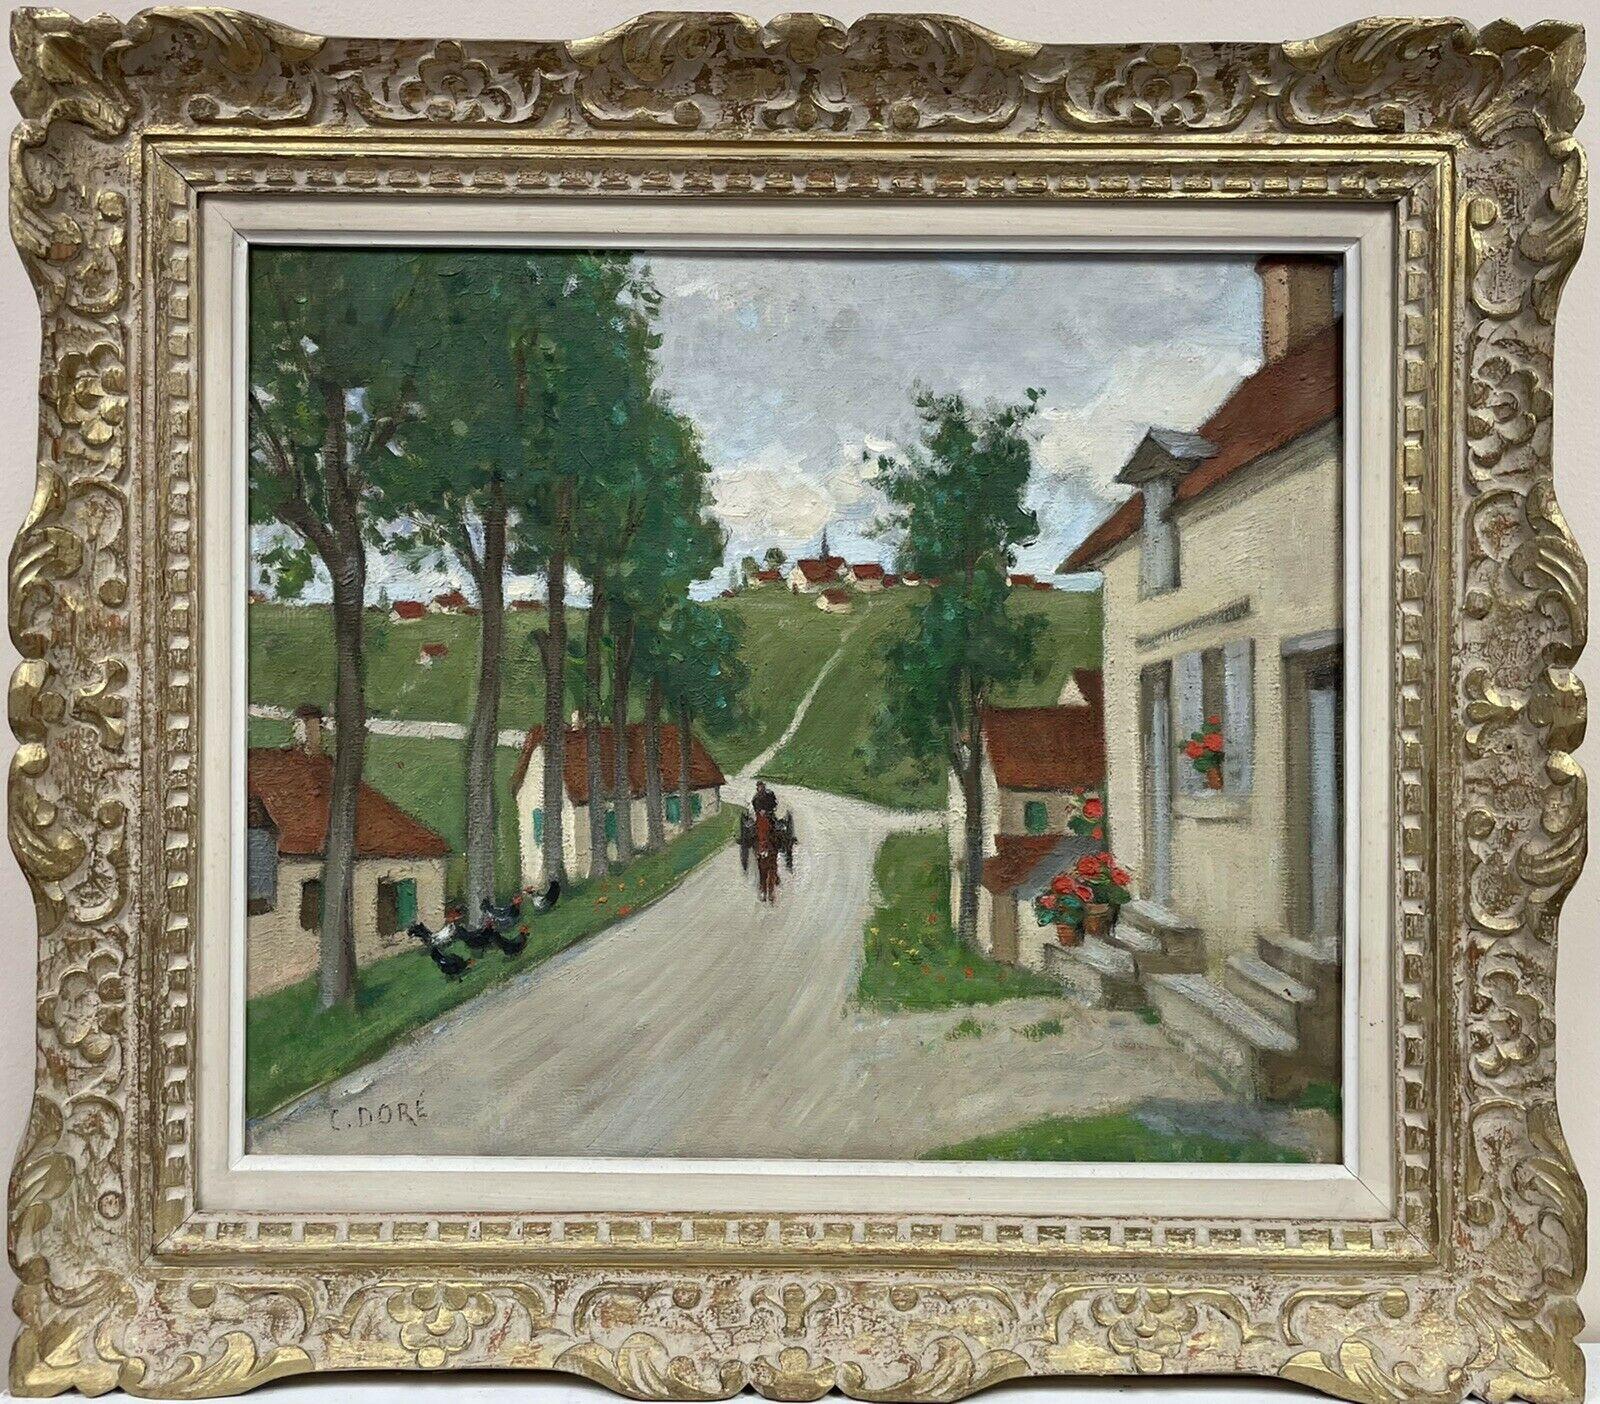 Constant Dore Figurative Painting - Original French Pont Aven School Oil Painting Horse & Cart Village Street Scene